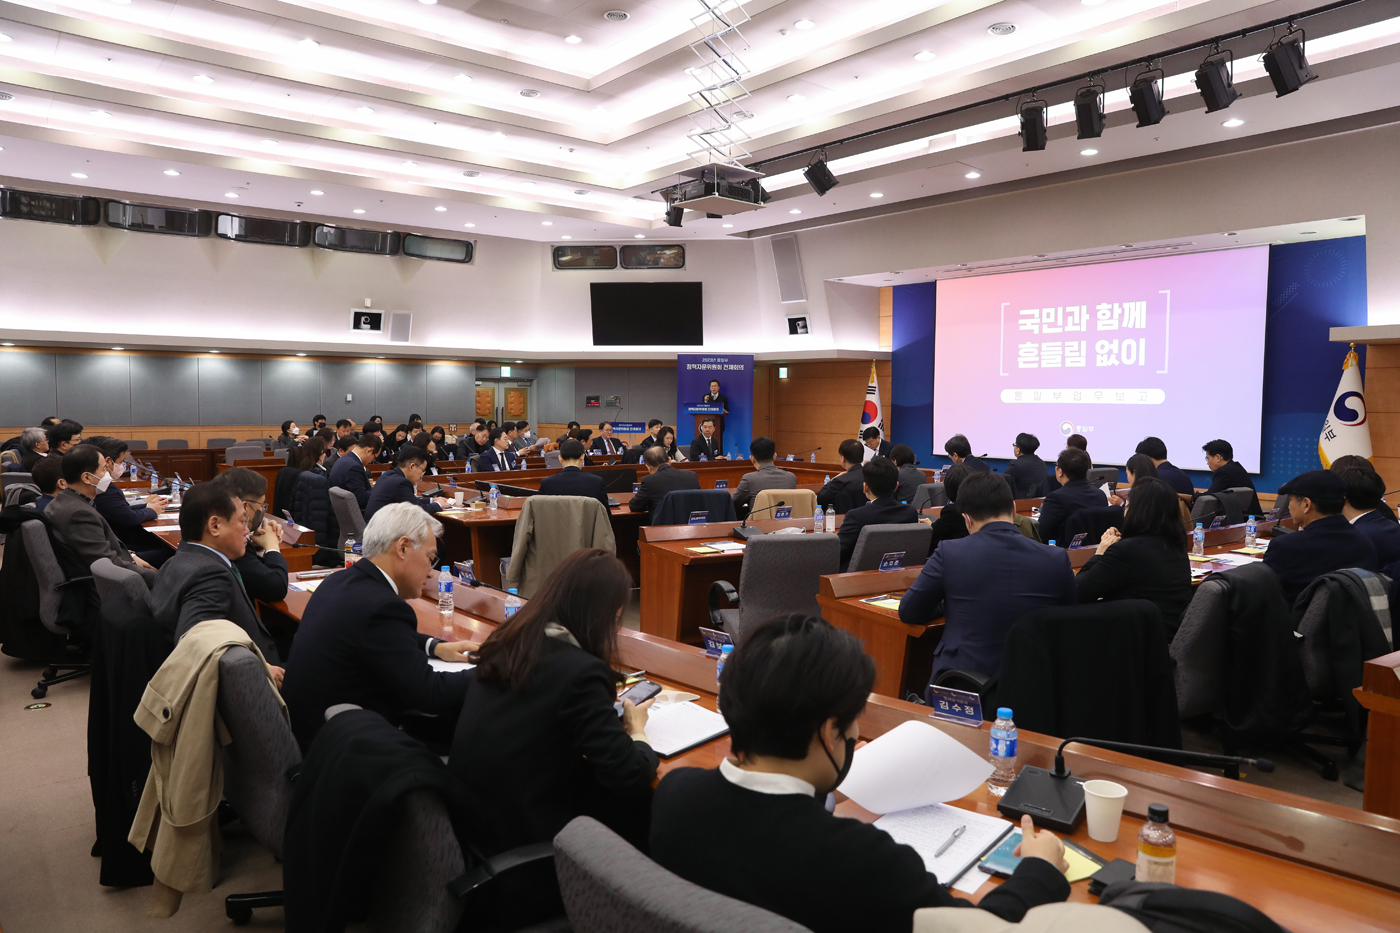 General meeting of the Unification Ministry’s 2023 policy advisory council